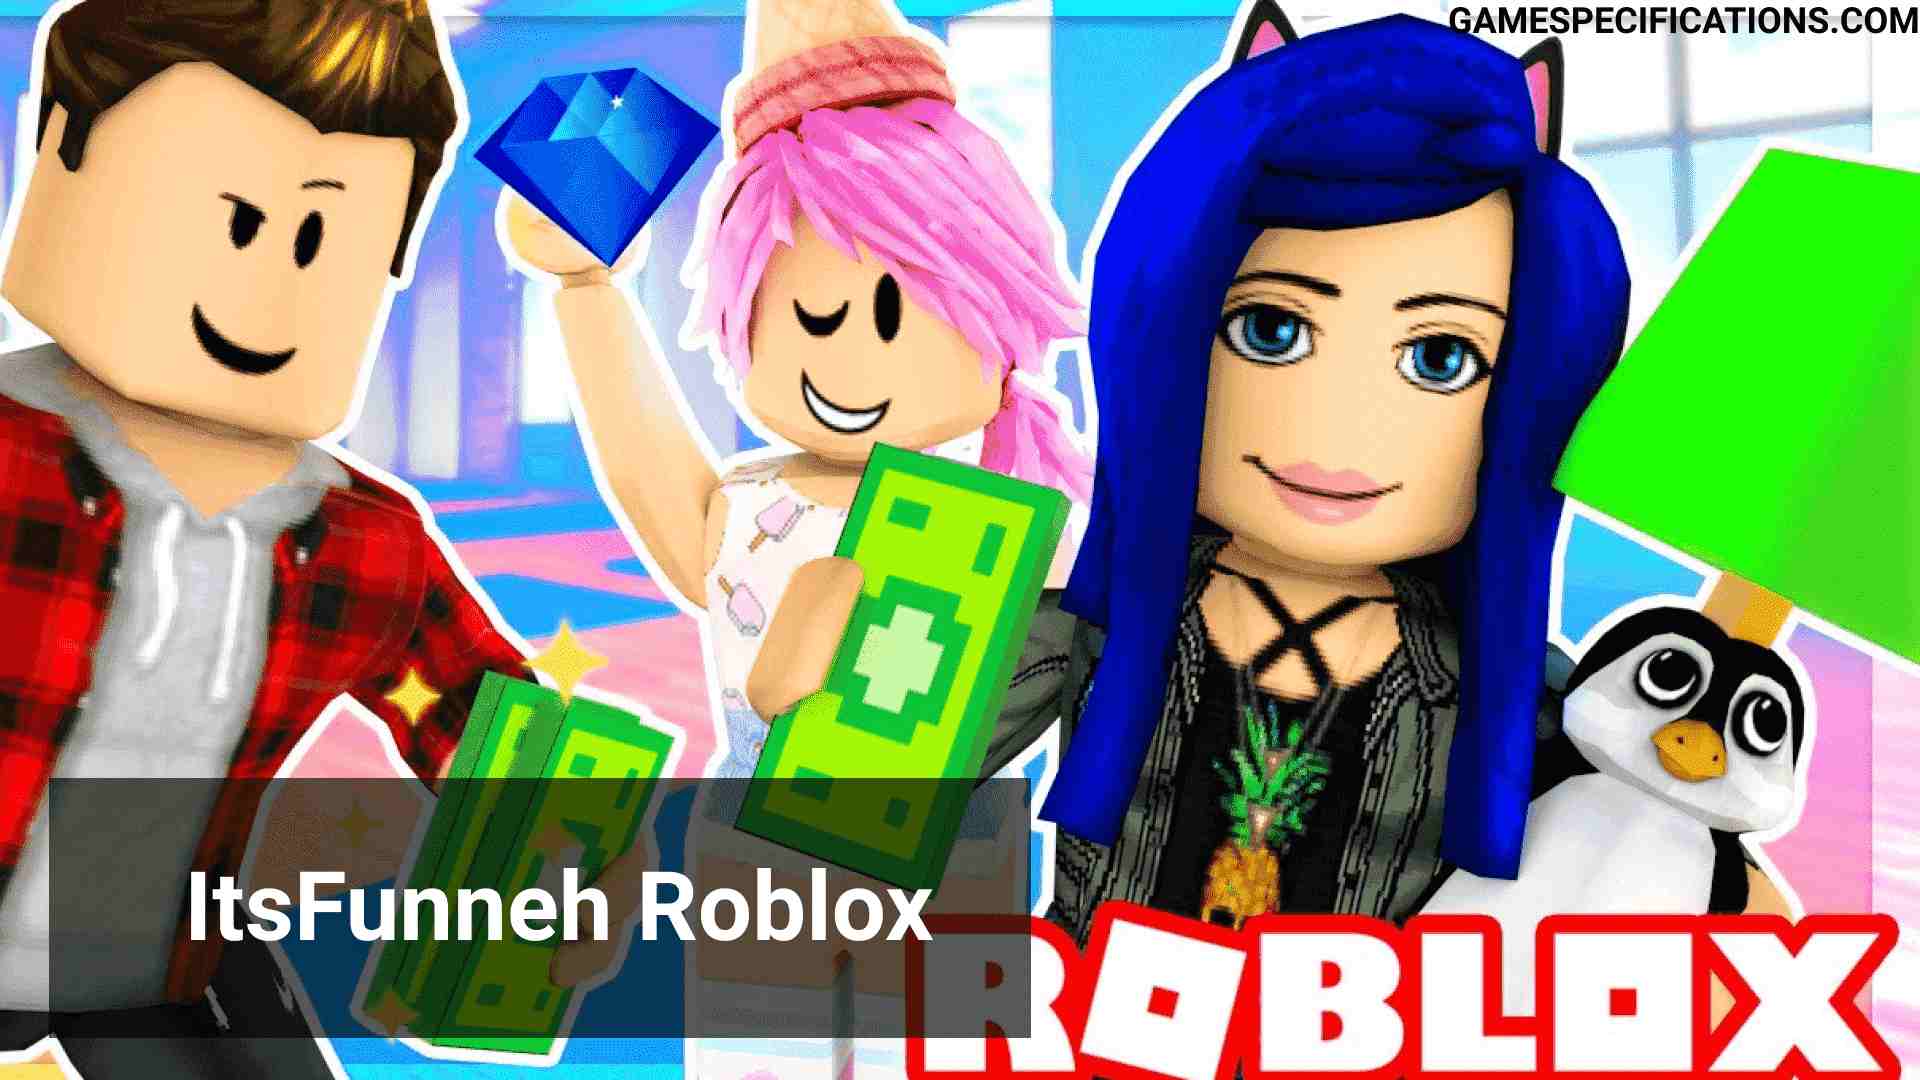 Itsfunneh Roblox Legendary Top Videos Game Specifications - funneh roblox character